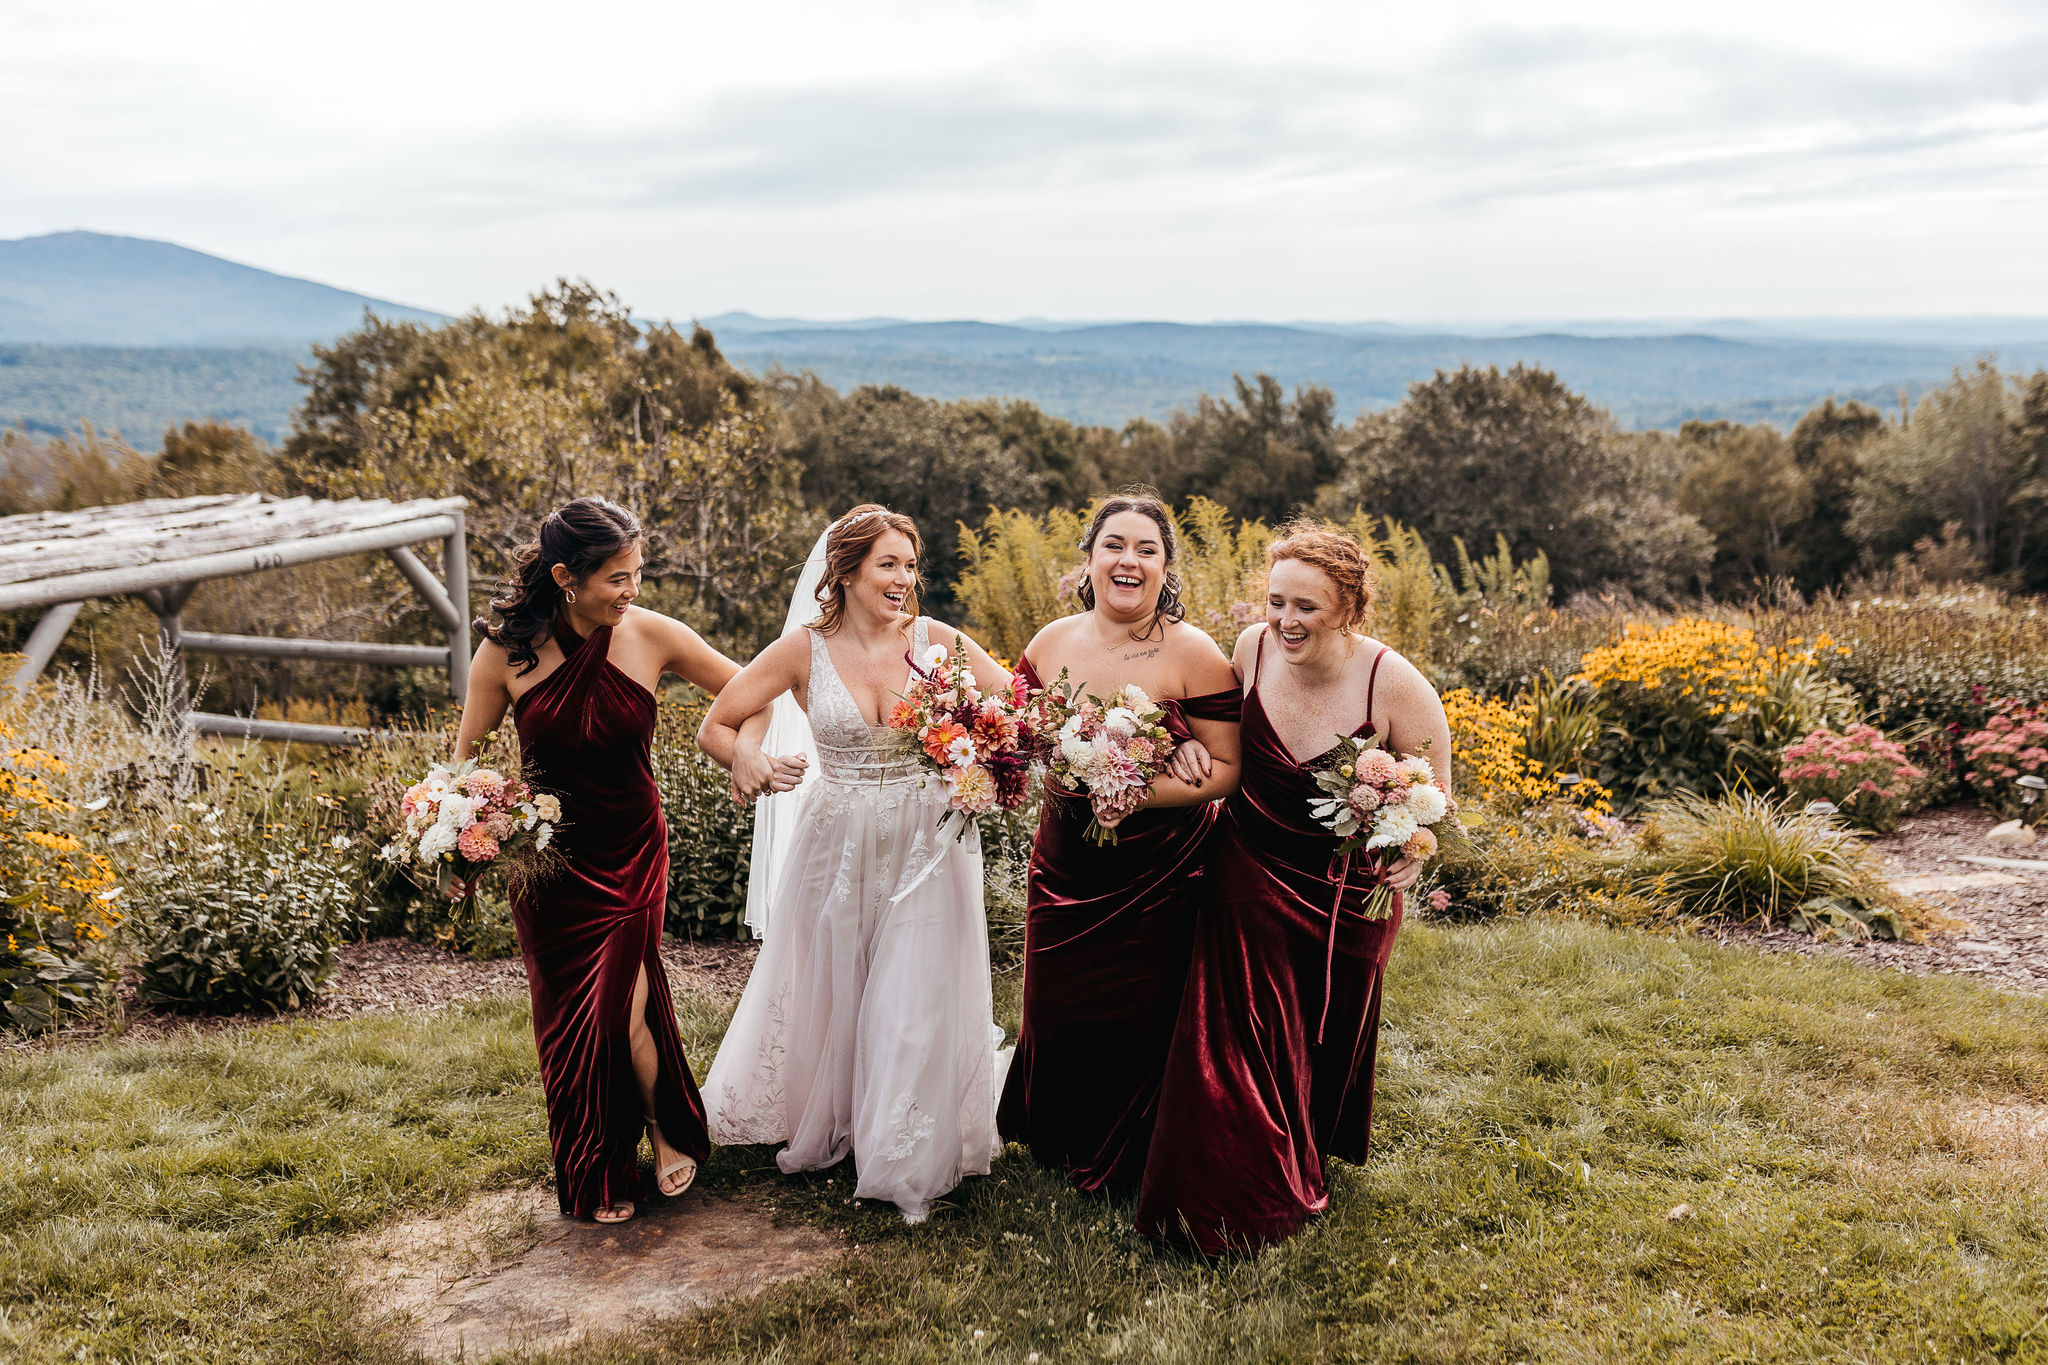 Bridal Party laughing and walking together at Cobb Hill on wedding day by Lisa Smith Photography